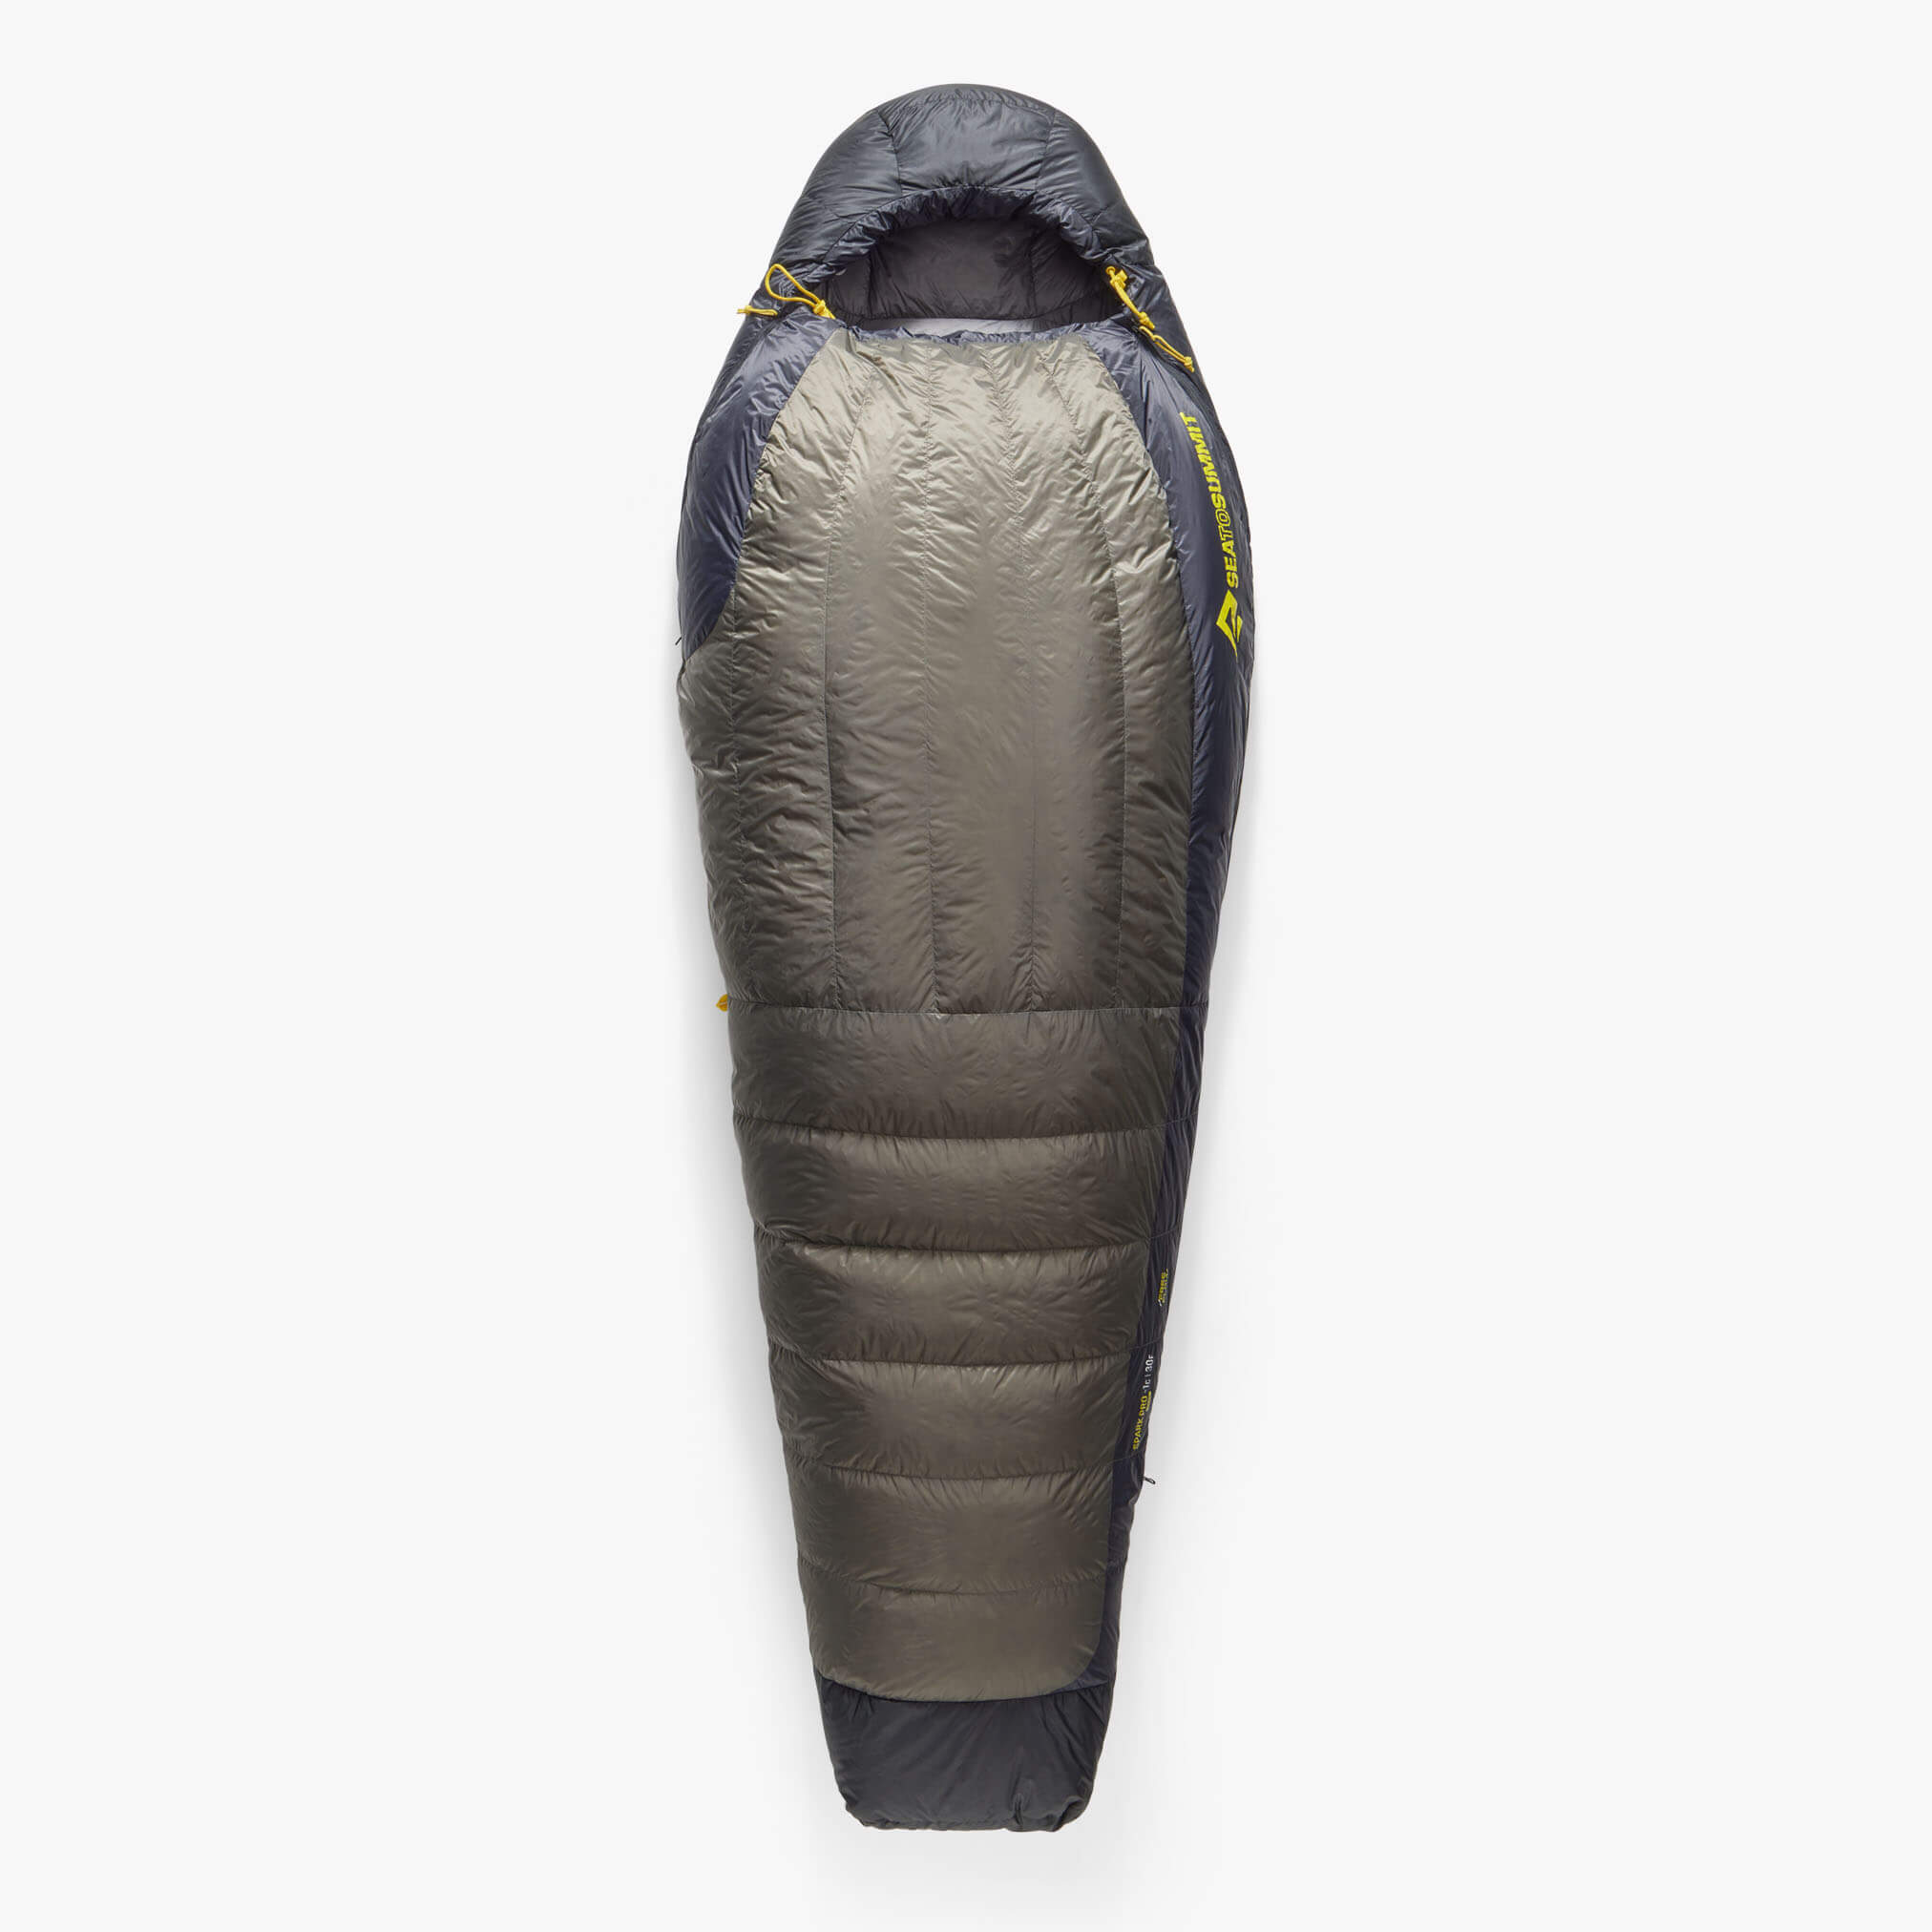 Sea to Summit Spark Pro -1C Down Sleeping Bag RDS